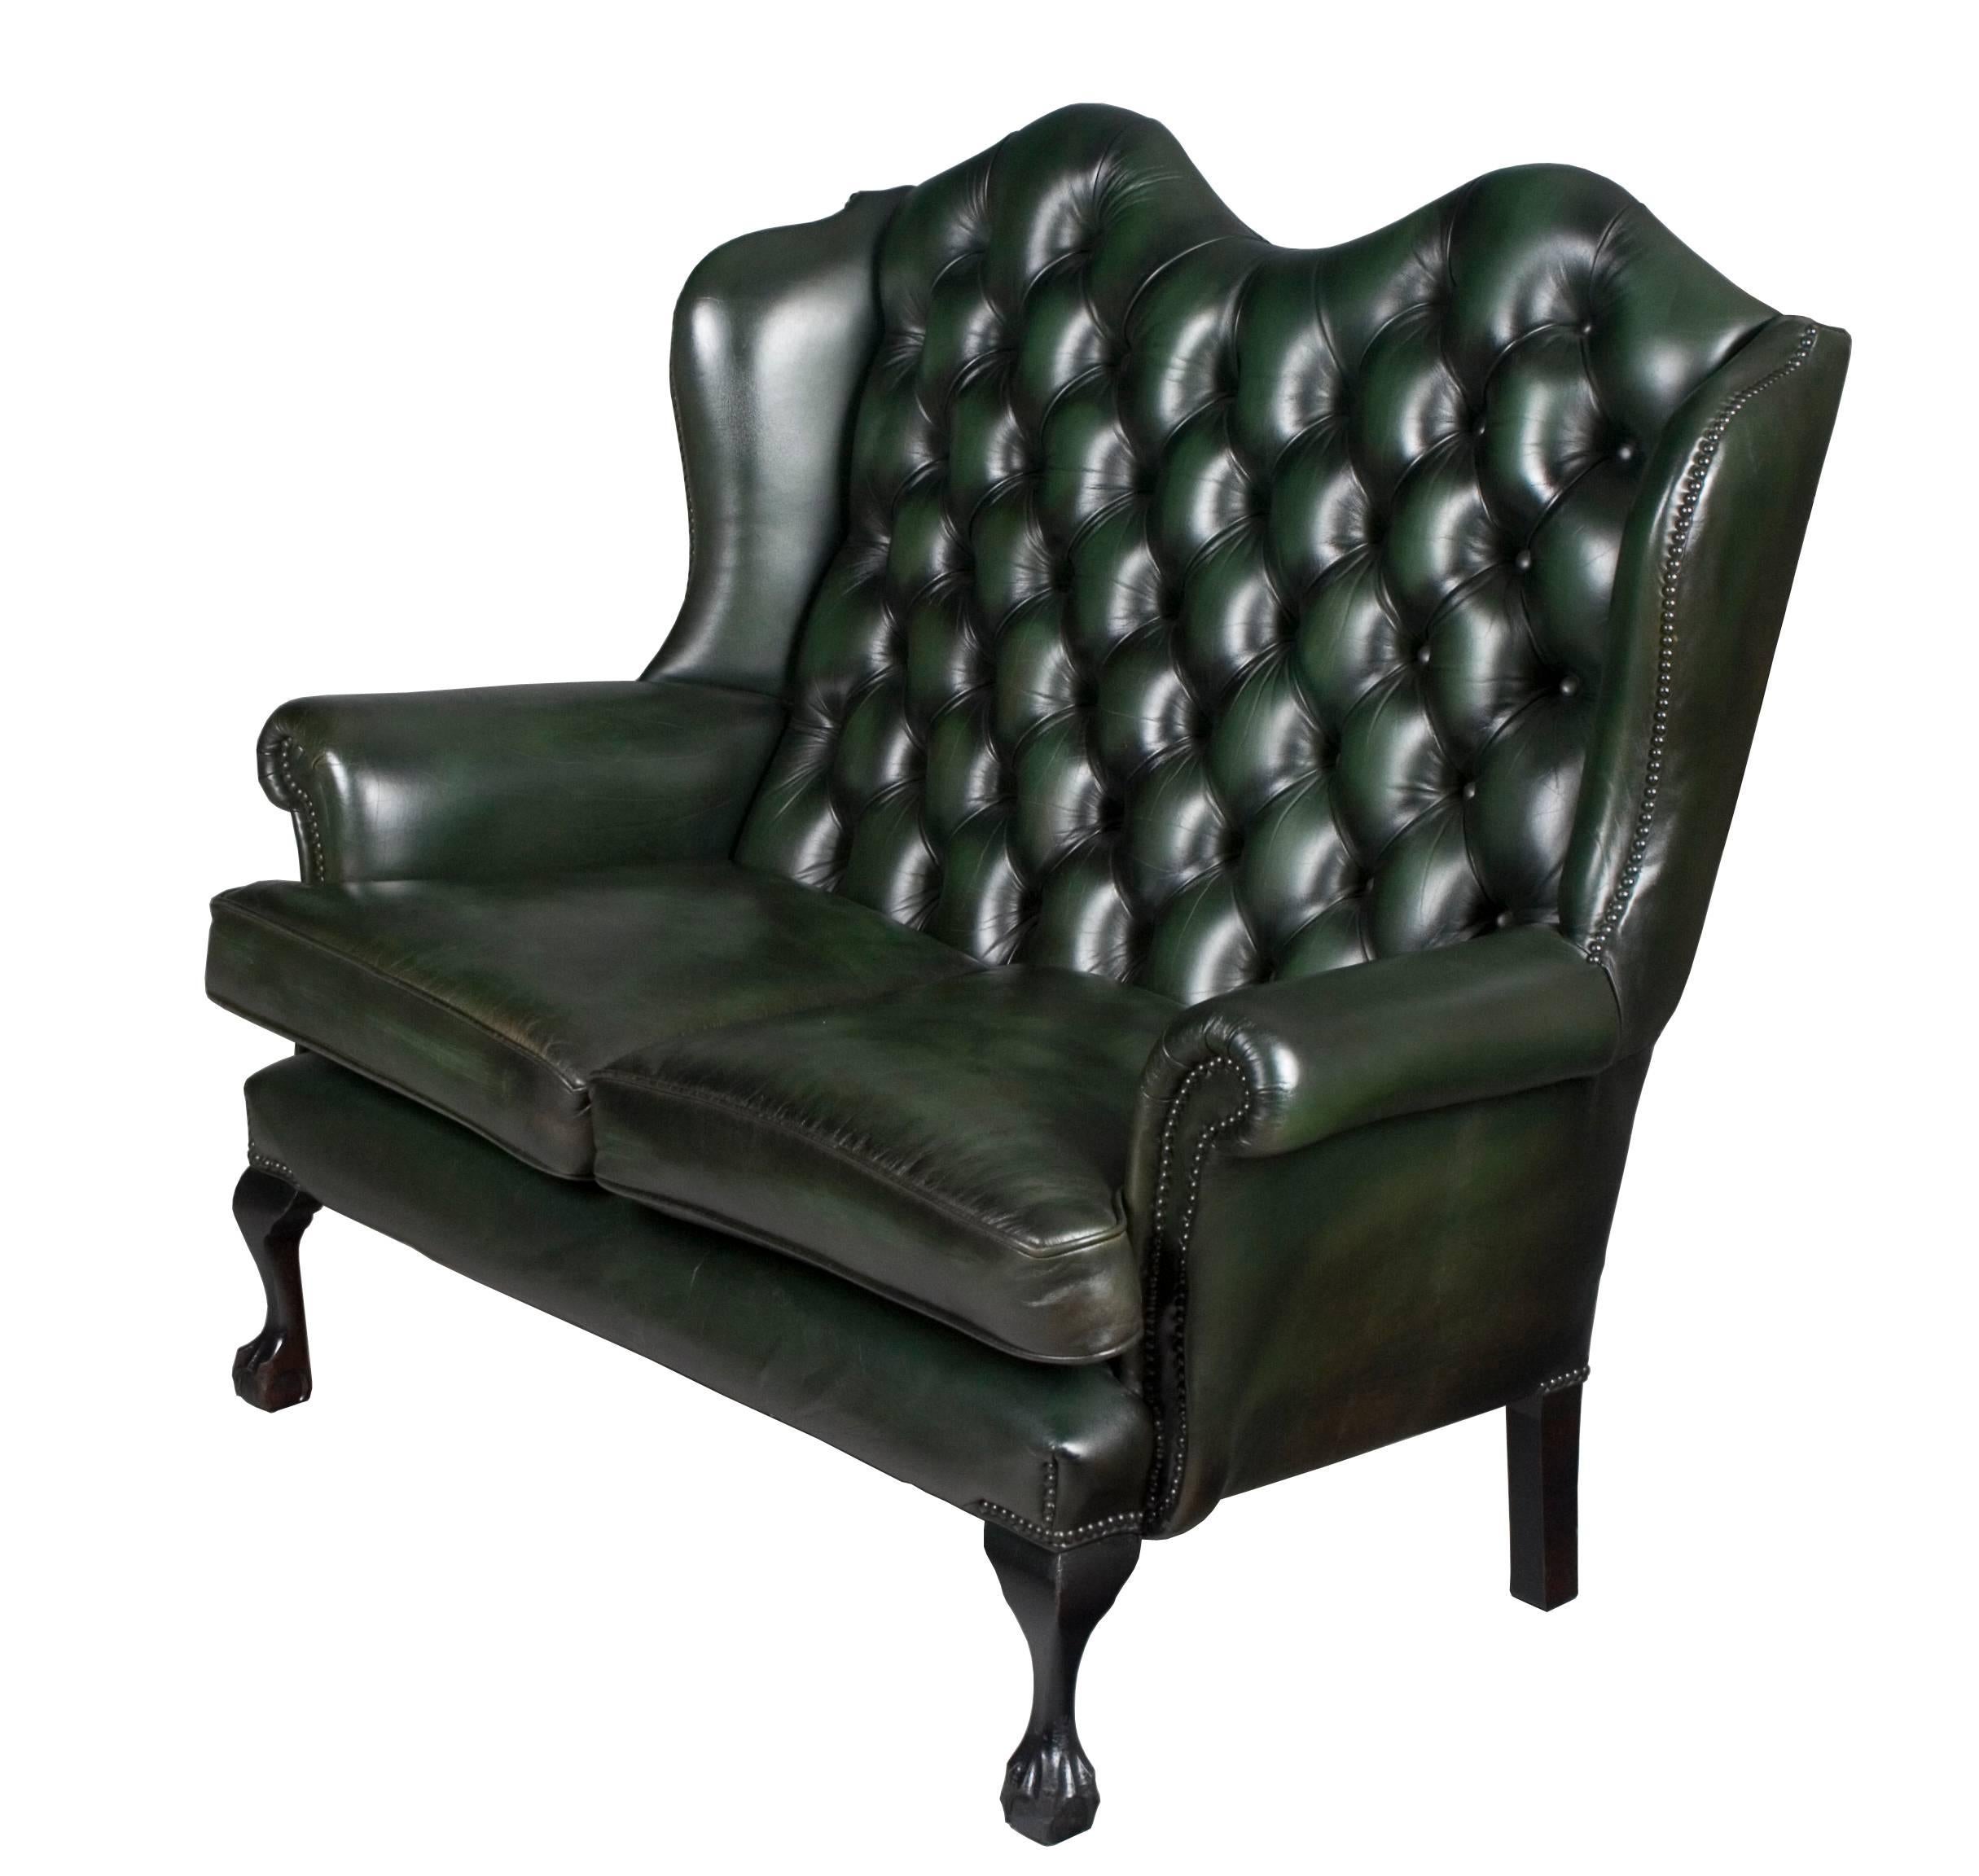 Late 20th Century Vintage Green Tufted Leather Queen Anne Style Loveseat For Sale